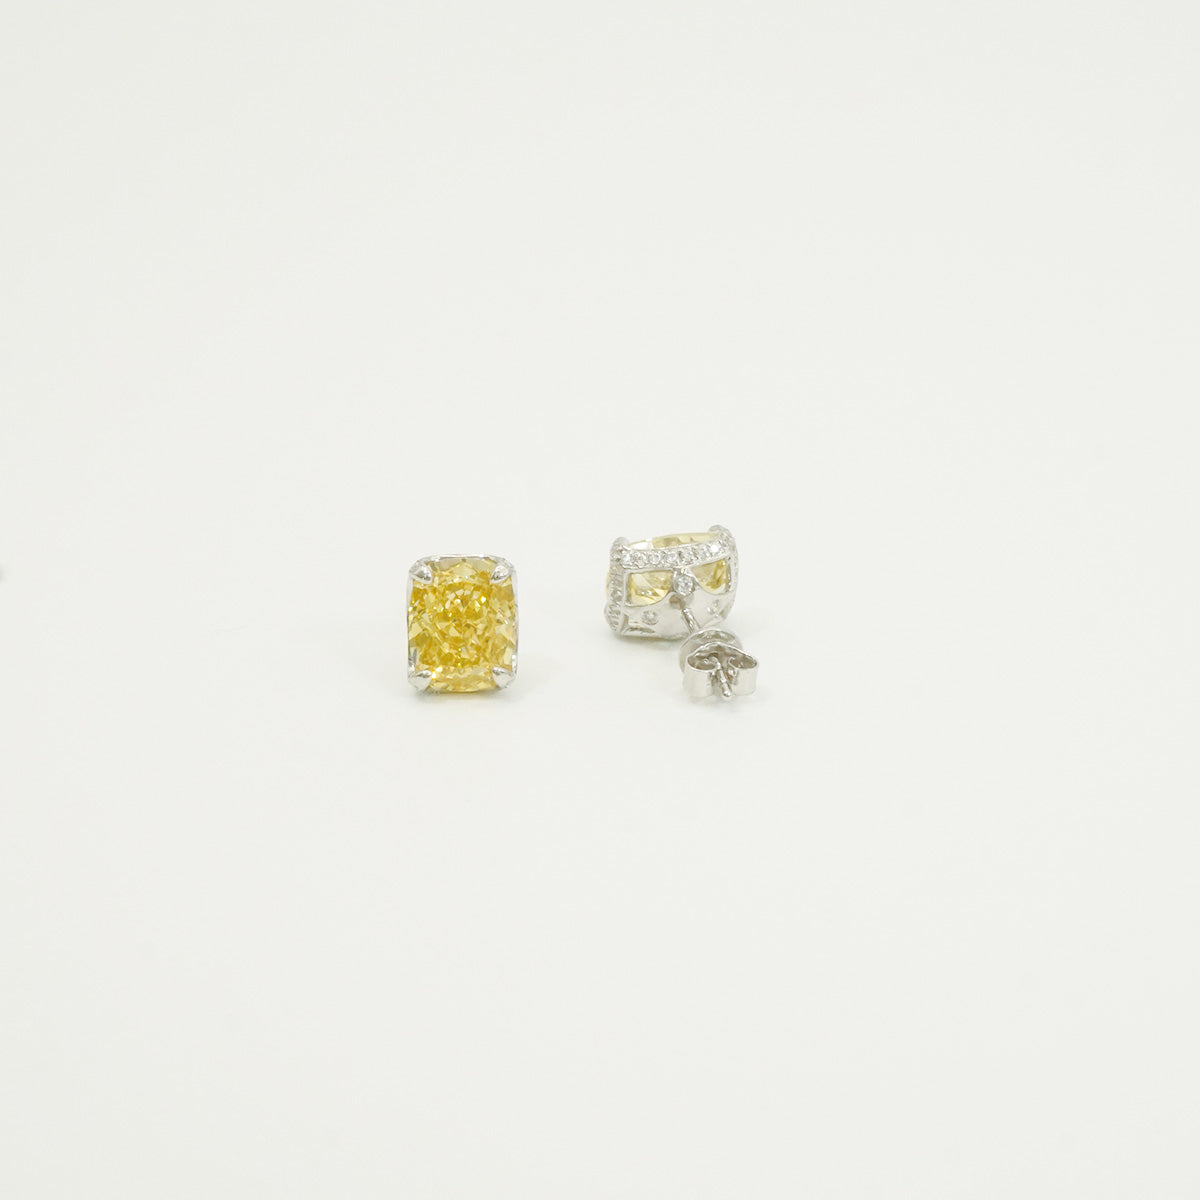 White Gold Square Yellow Sapphire Stud Earrings